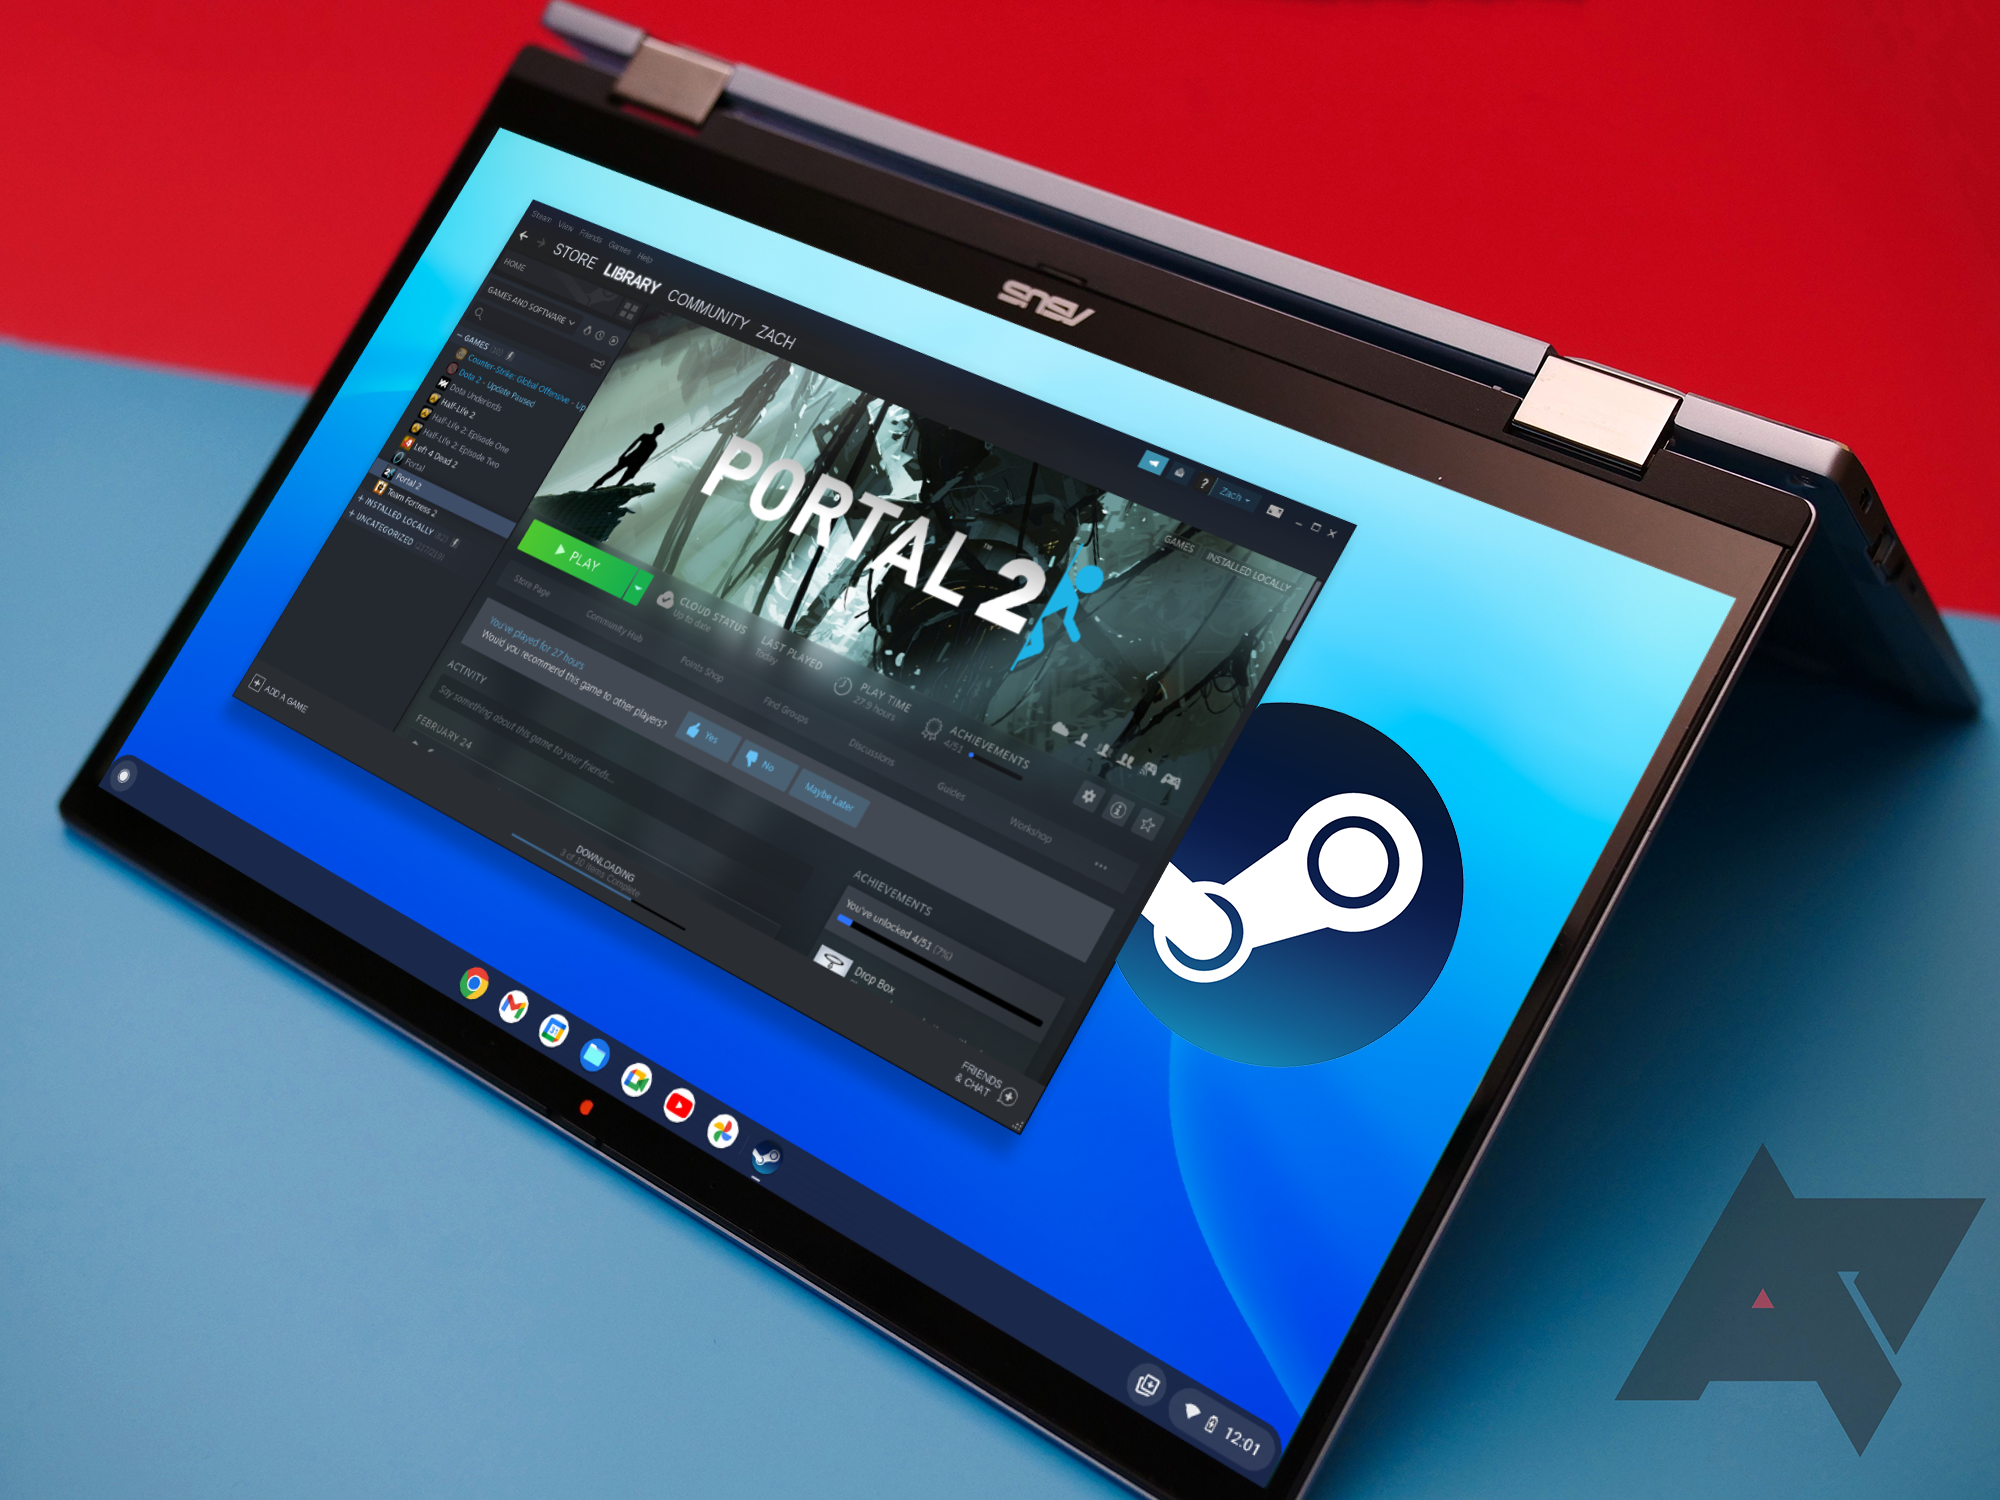 ChromeOS gets serious about gaming as Steam support enters beta